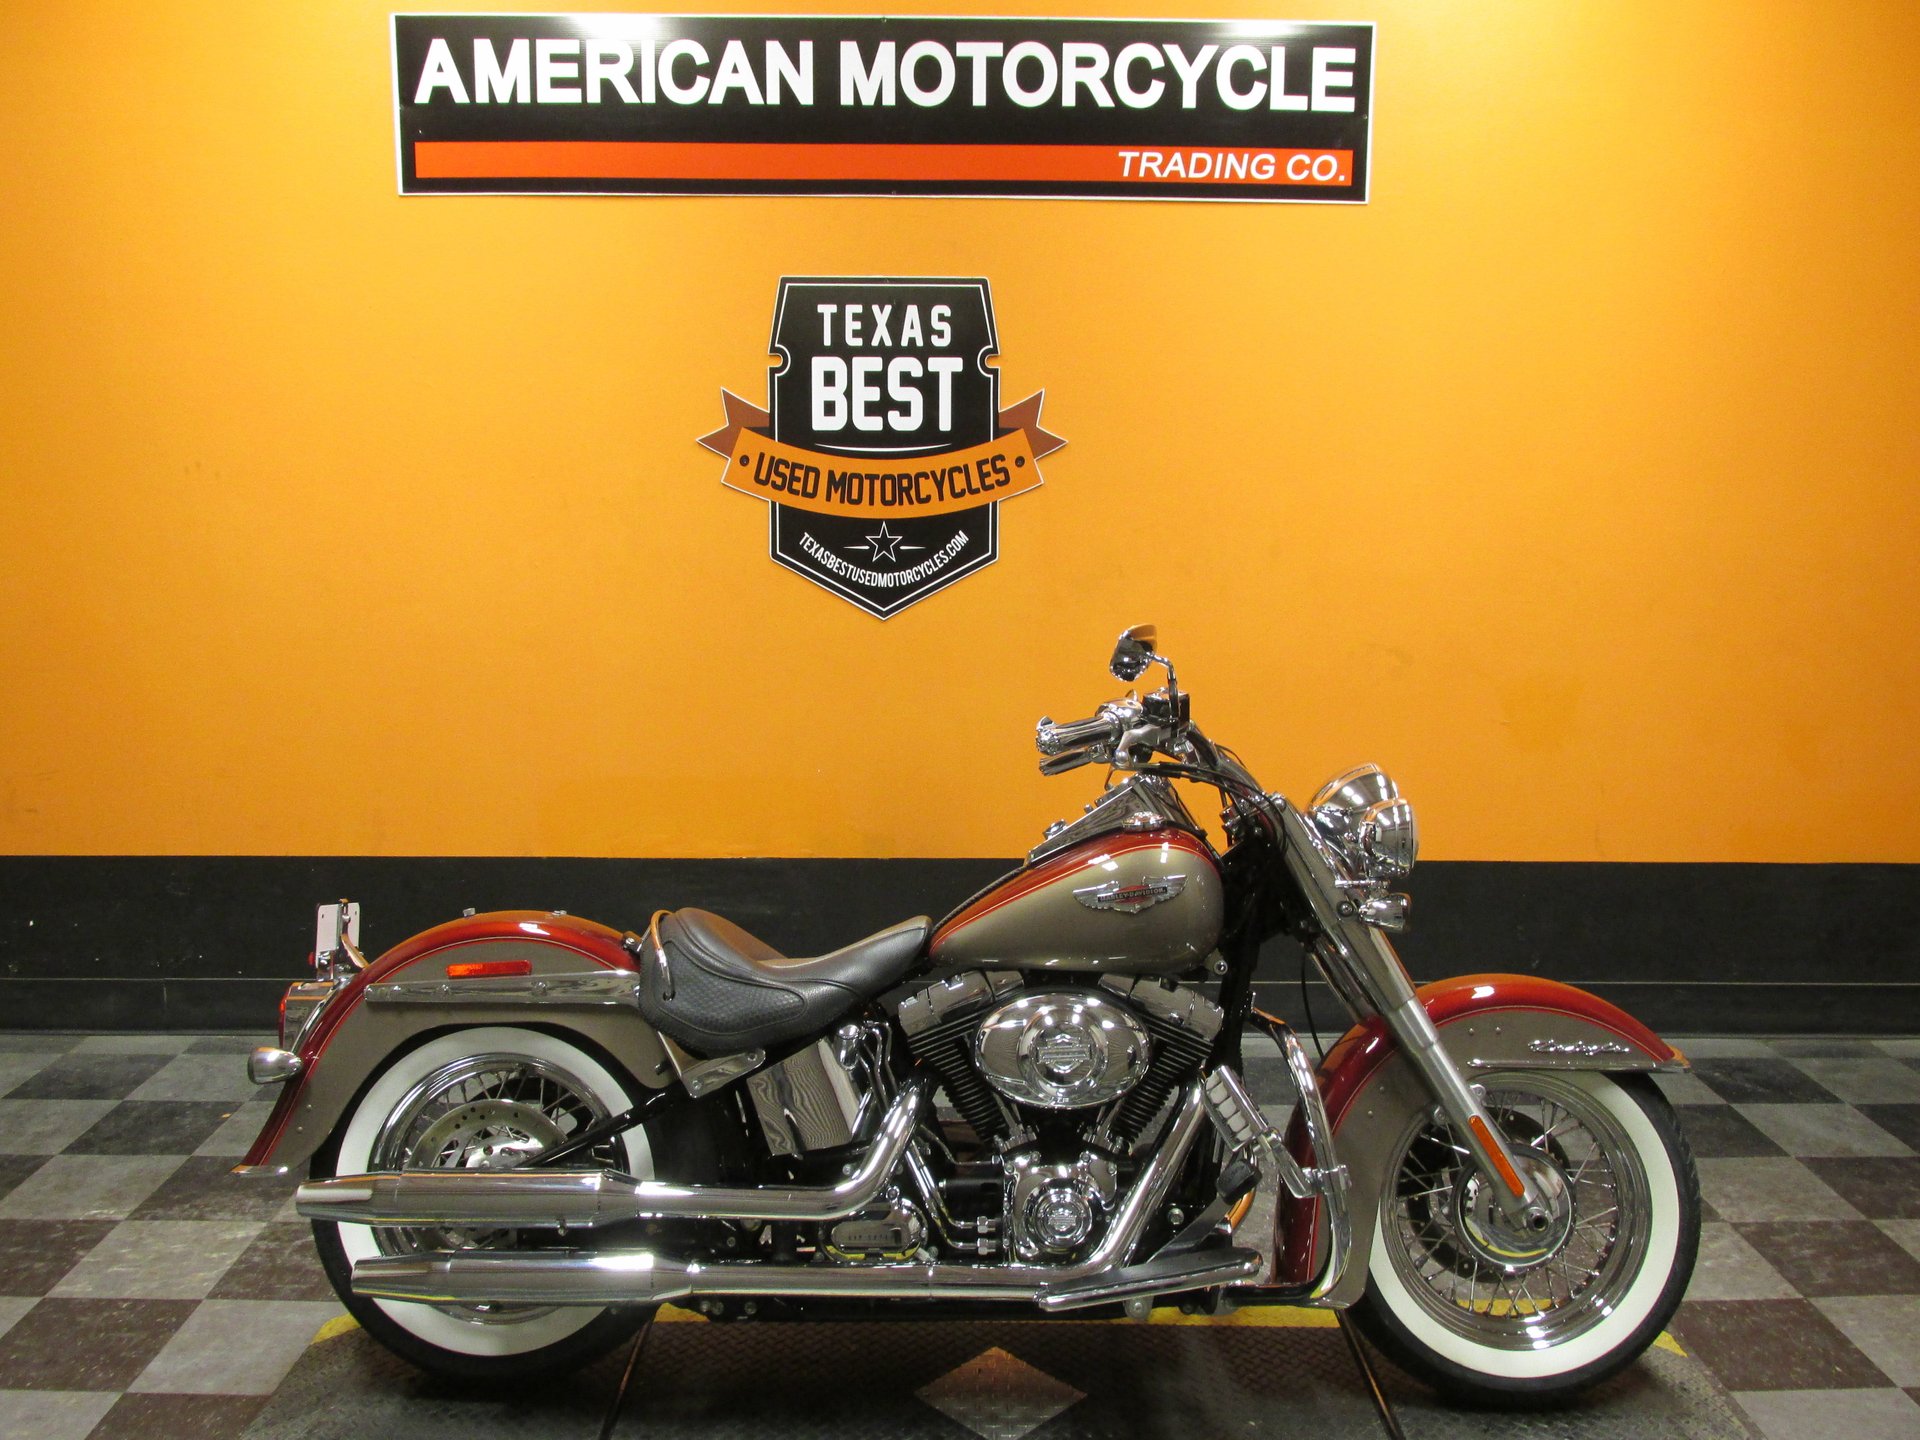 2009 Harley Davidson Softail Deluxe American Motorcycle Trading Company Used Harley Davidson Motorcycles